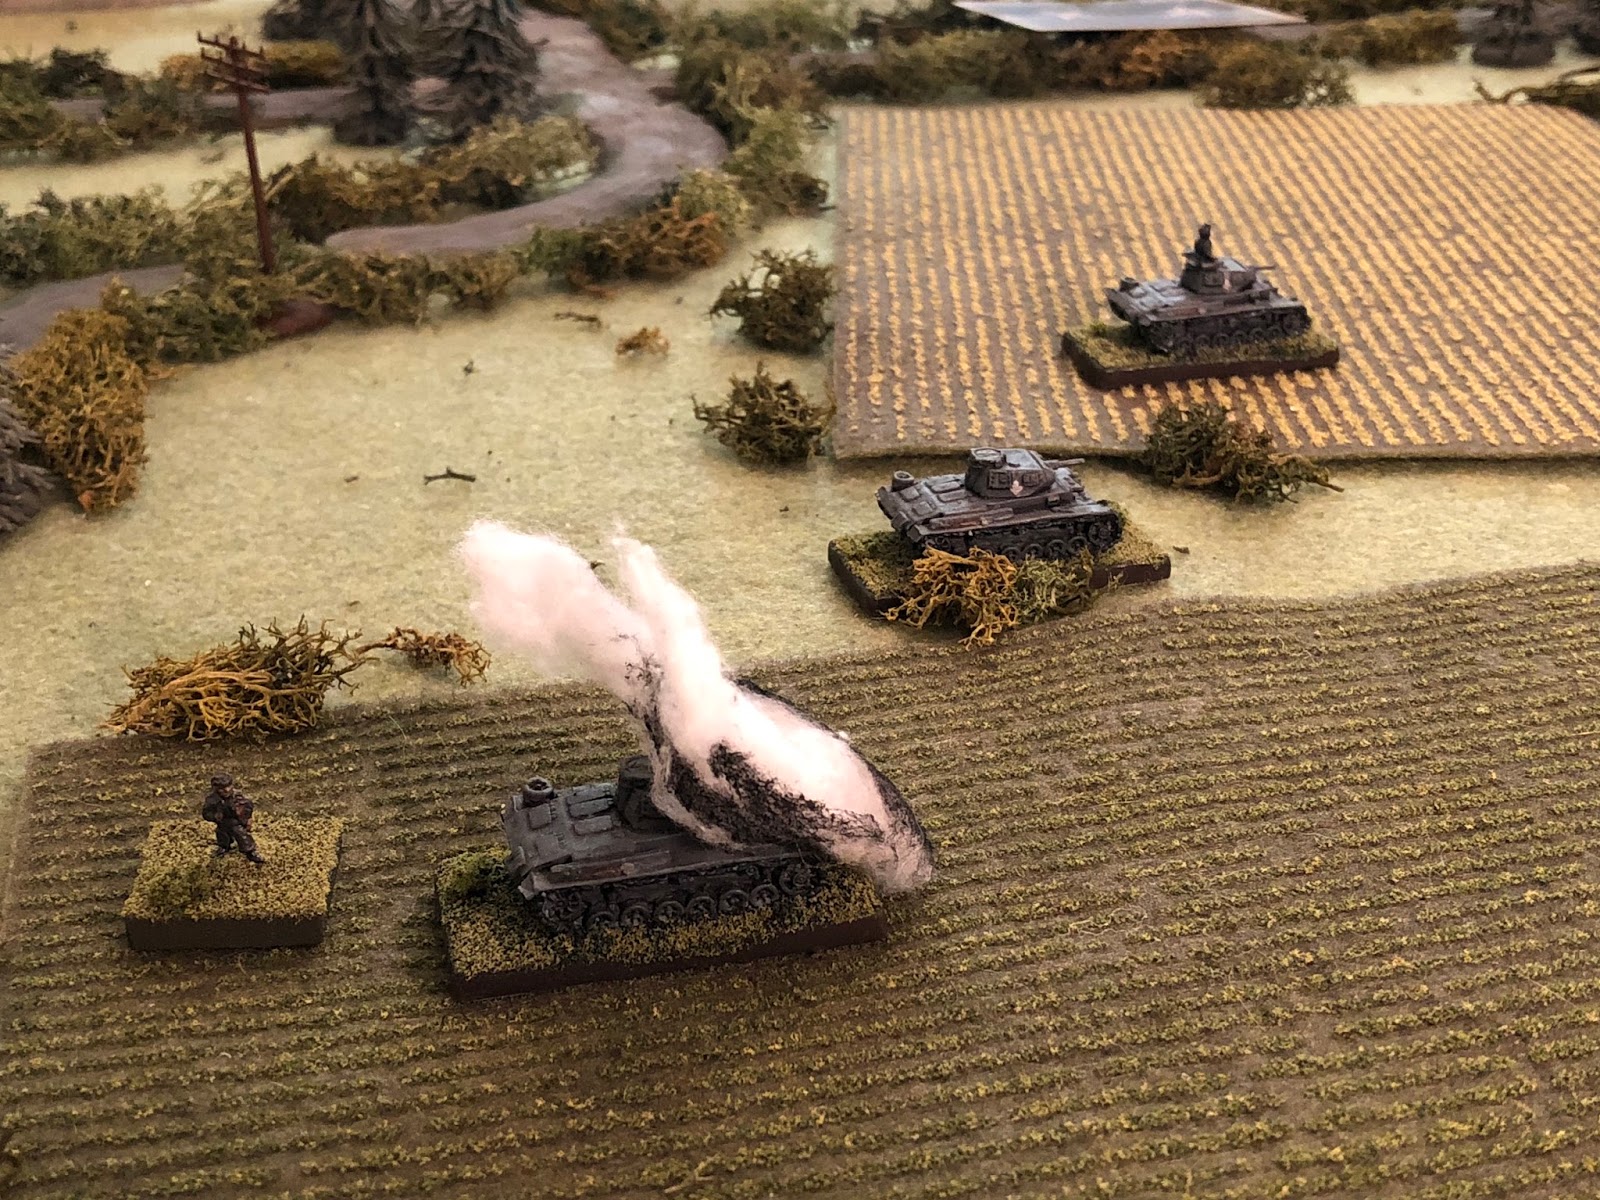  BAM!!!!&nbsp; SSgt Grossman, groggy from shock and bleeding from his forehead and his loader are the only crew members able to bail out of the disabled Panzer III.   